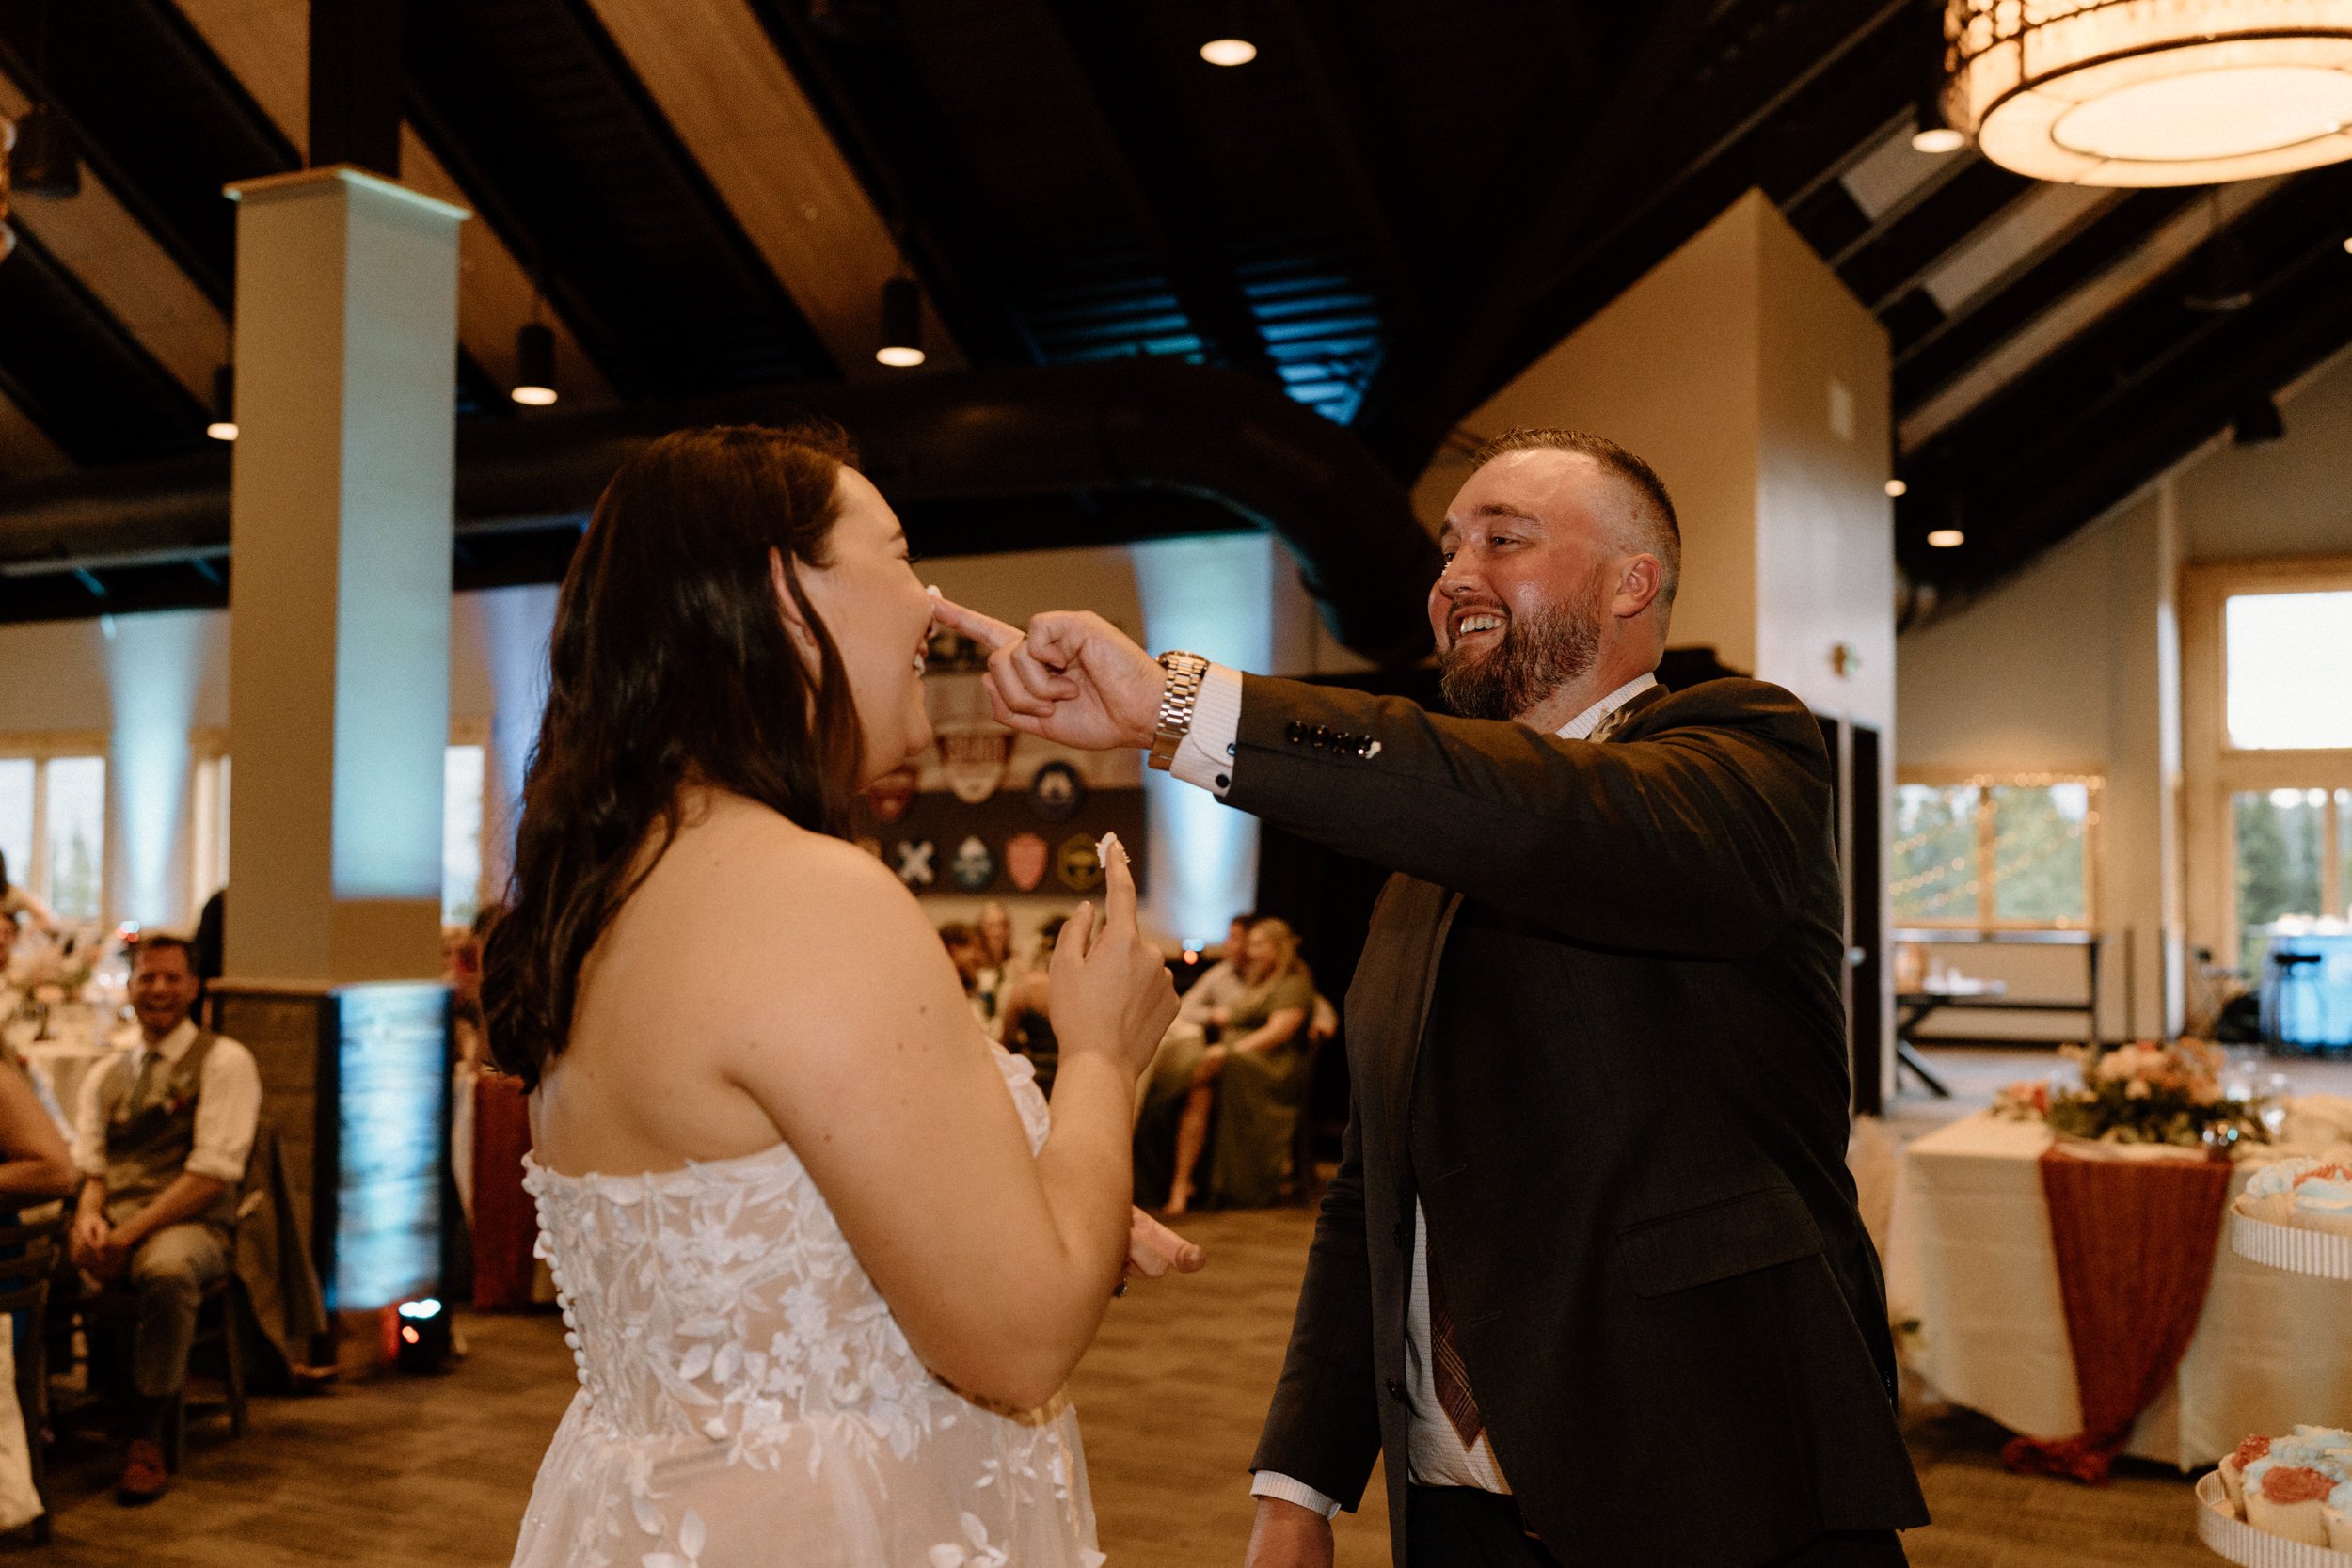 Bride and groom feed a piece of cake to each other